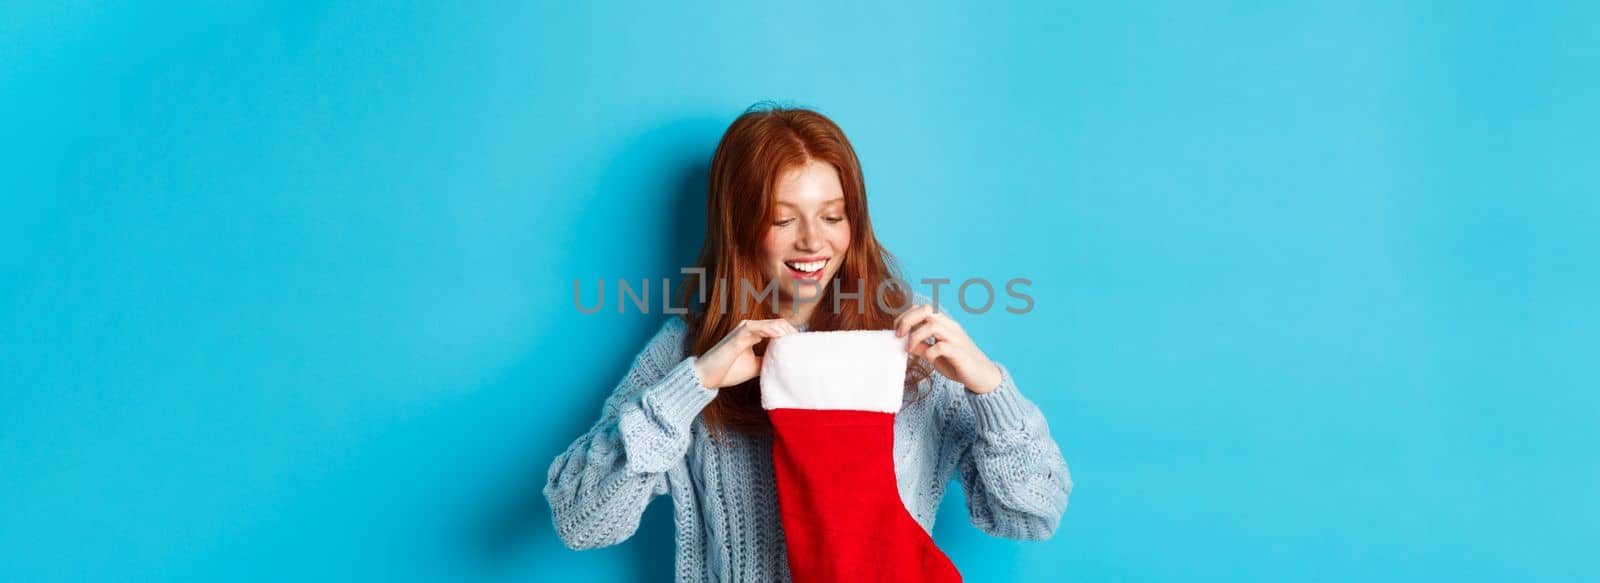 Winter holidays and gifts concept. Funny redhead girl looking inside Christmas stocking and smiling happy, receiving xmas present, standing against blue background.